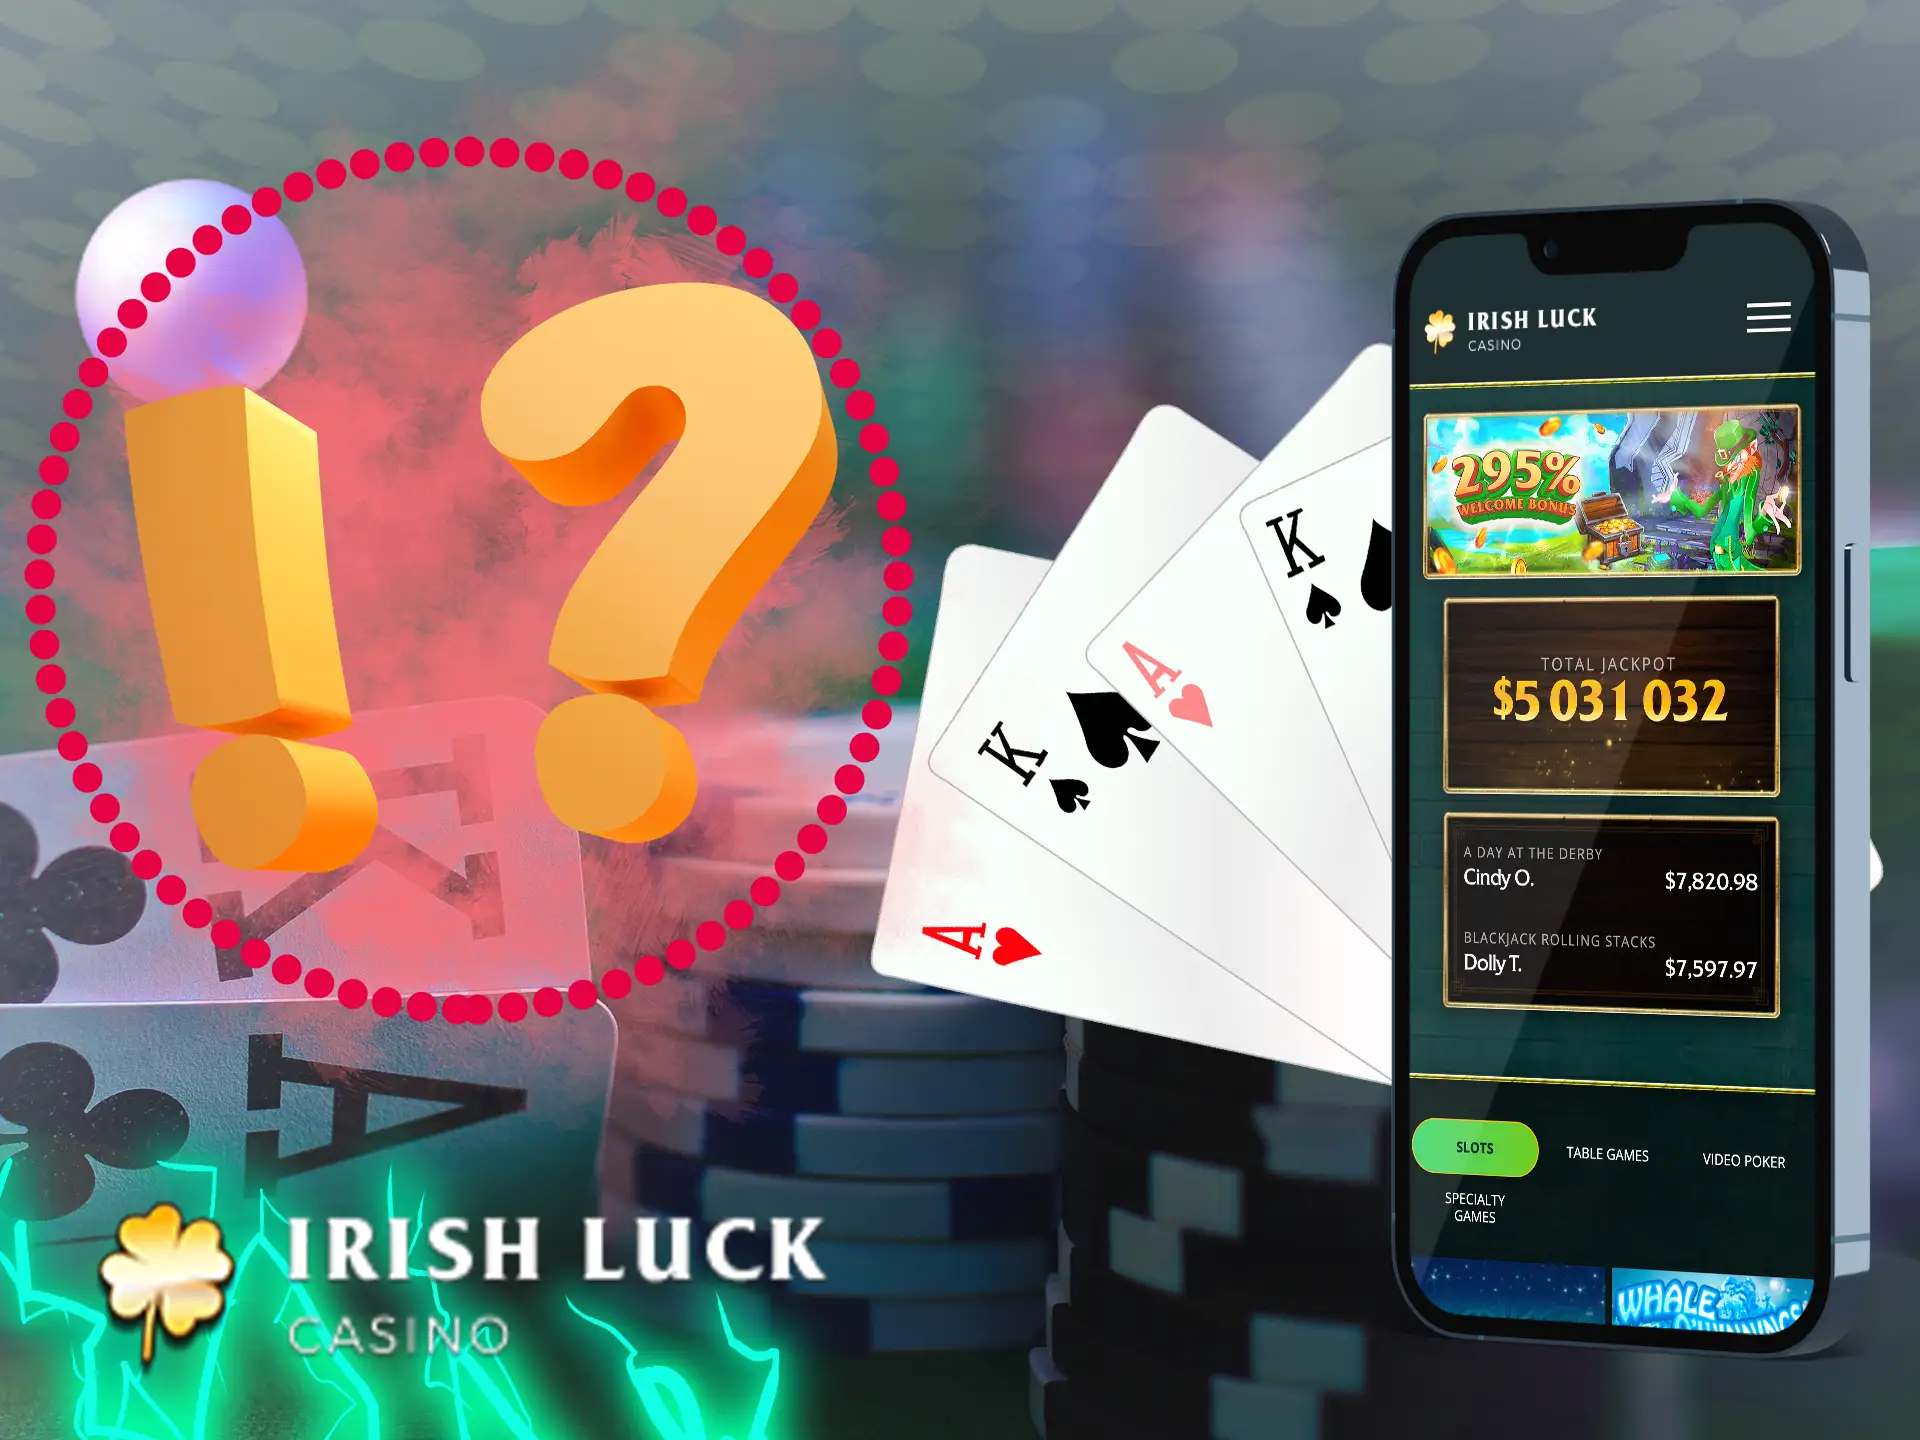 To get started simply register and start playing live at Irish Luck.